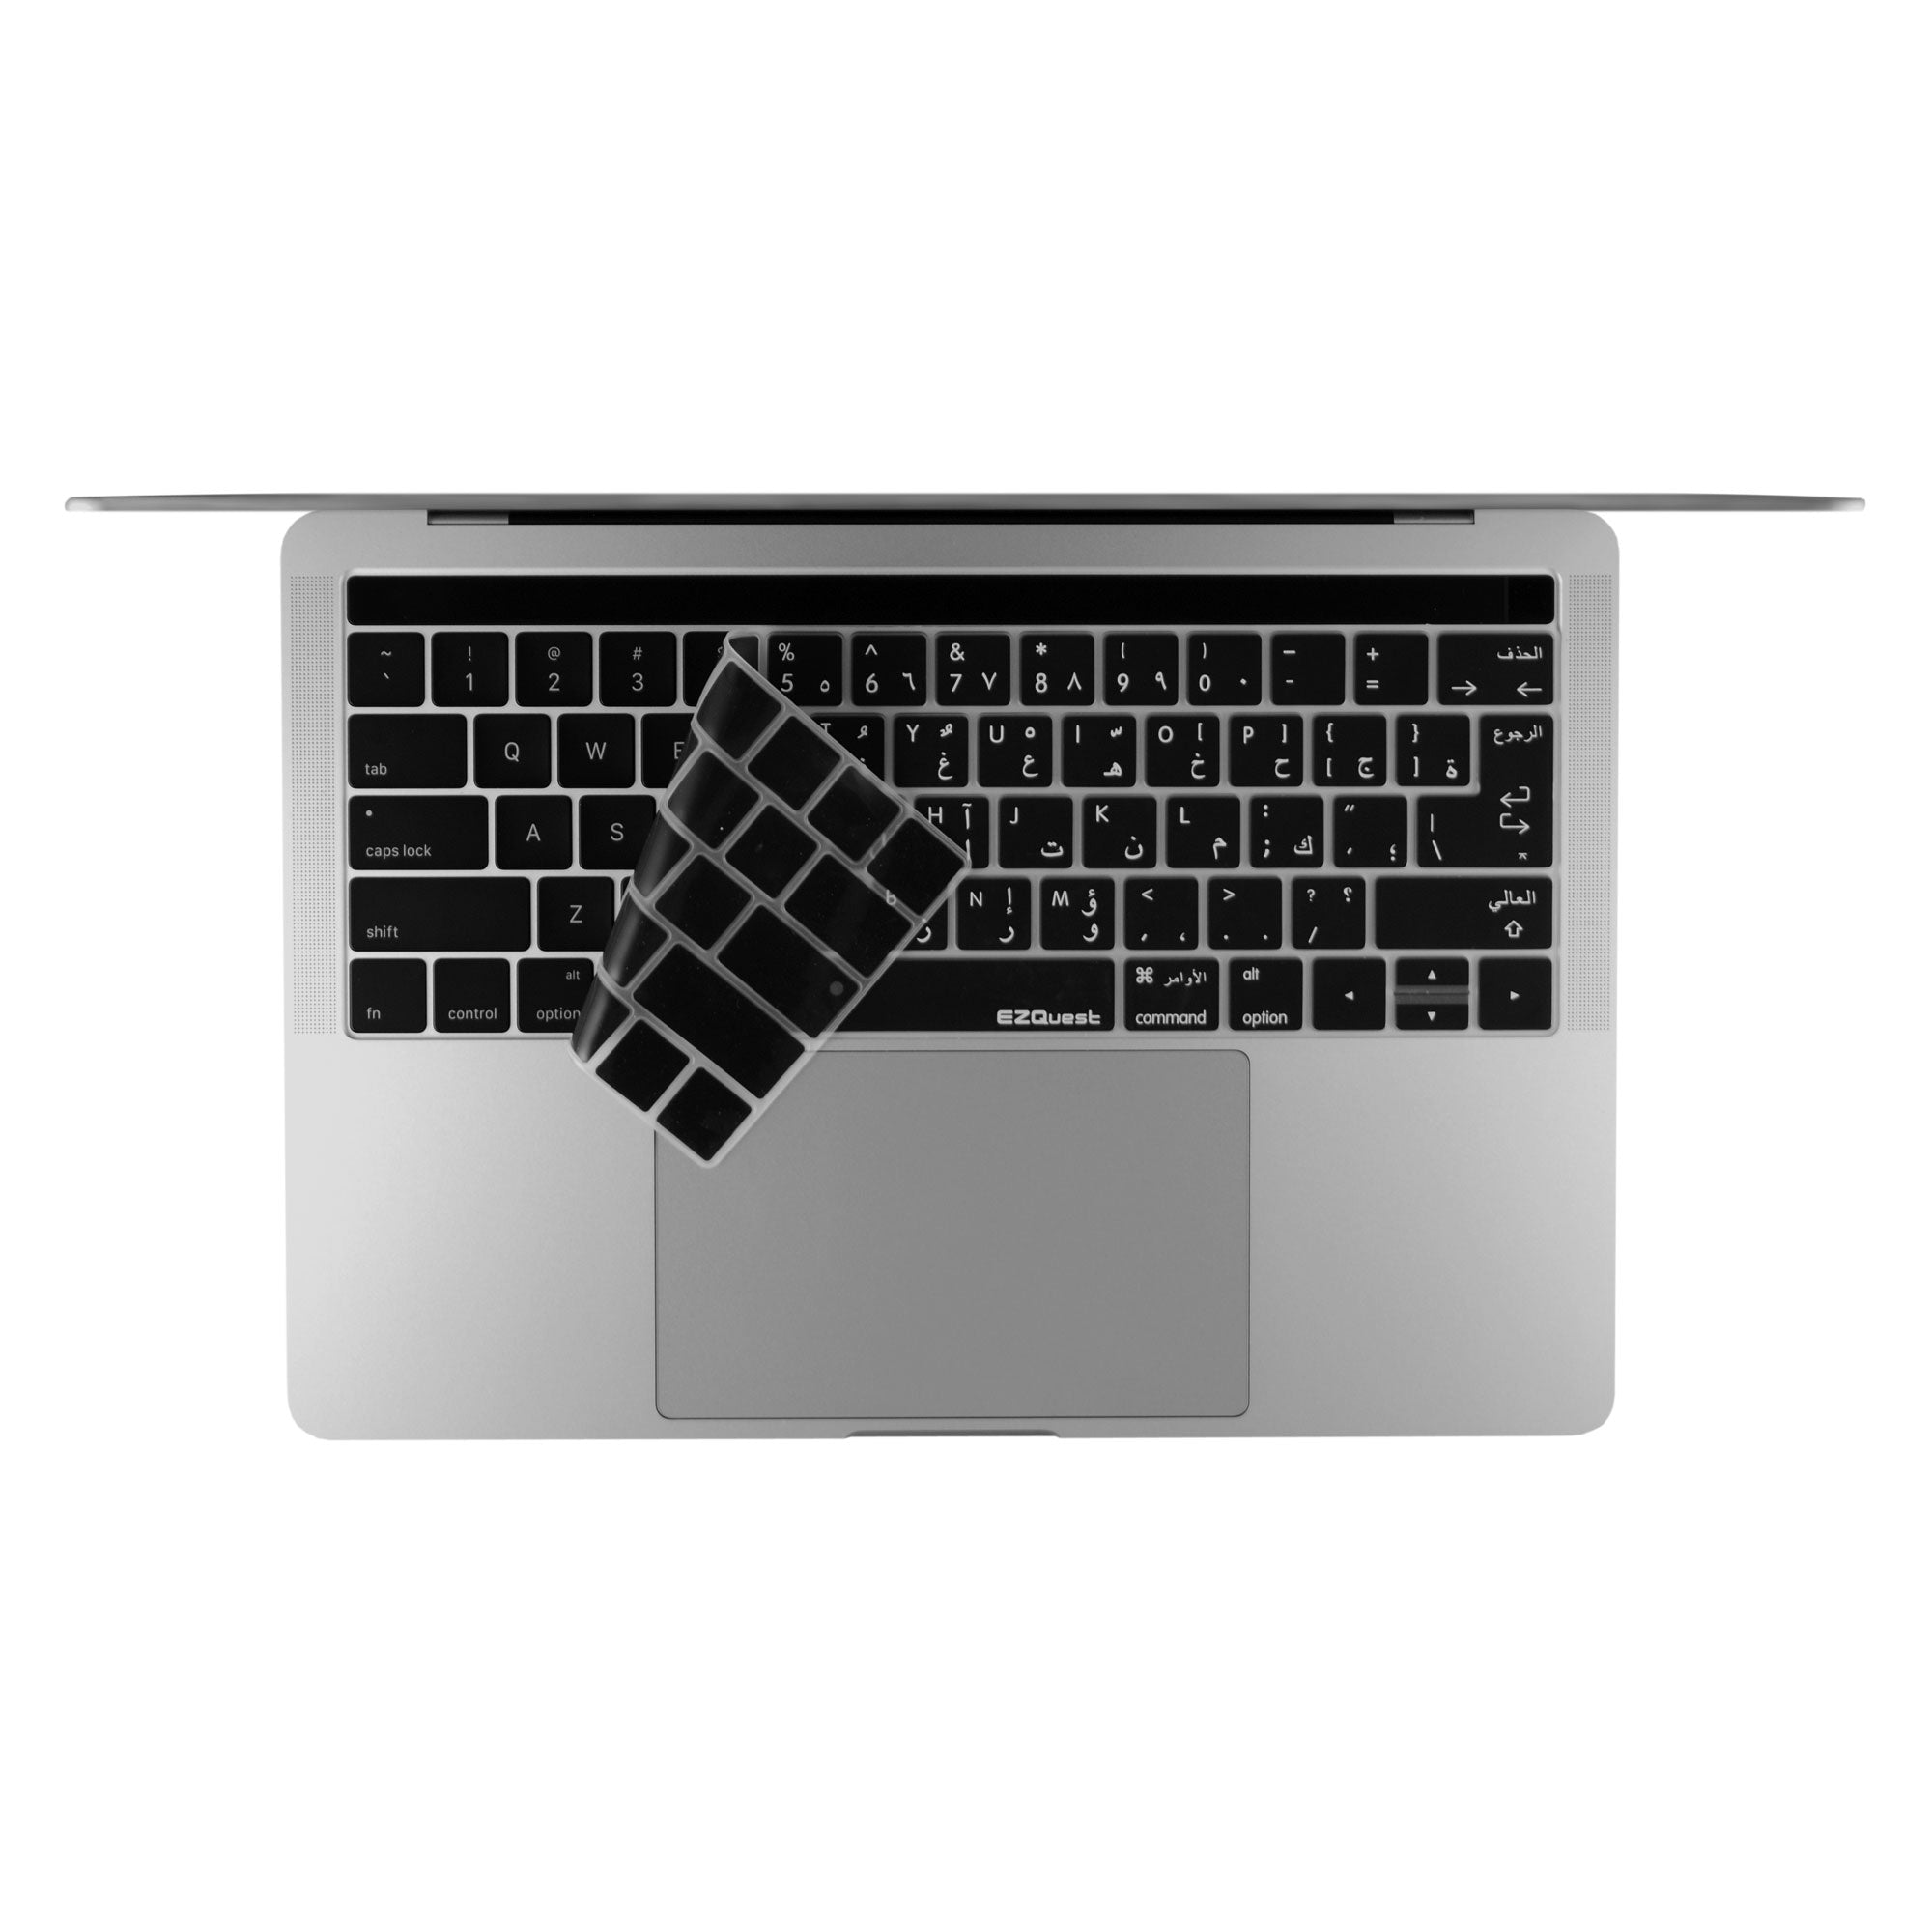 Ezquest Arabic & English Keyboard Cover for Macbook Pro 13" and 16"